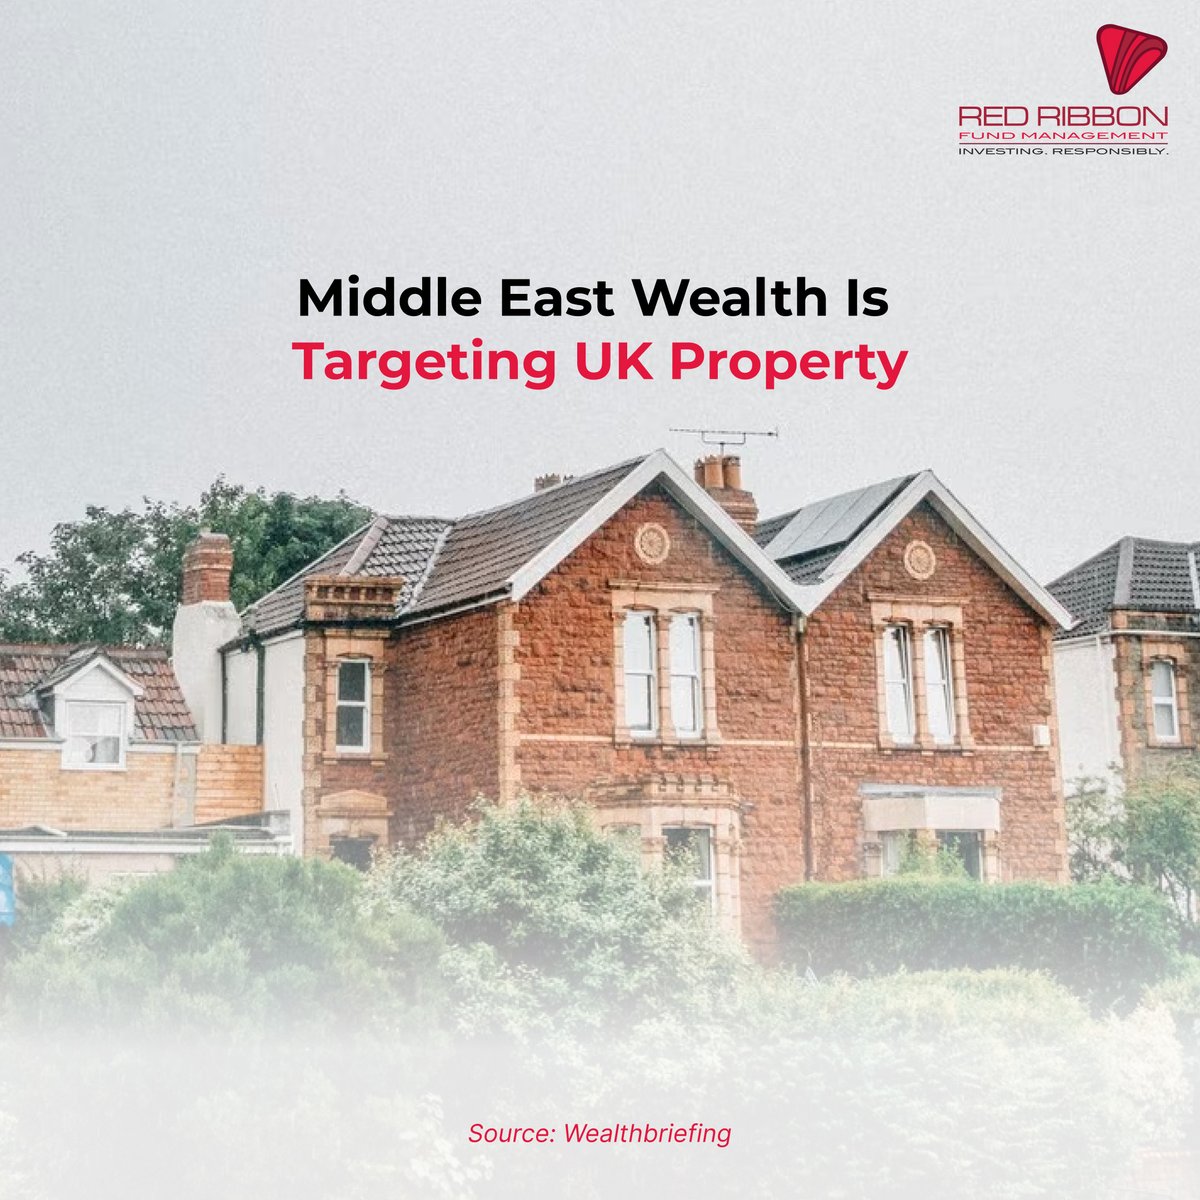 Middle East Wealth Sets Sights on UK Property

Read more: hubs.ly/Q01PxcQF0 

#redribbon #Fundmanagement #MiddleEastWealth #UKproperty #Investments #RealEstate